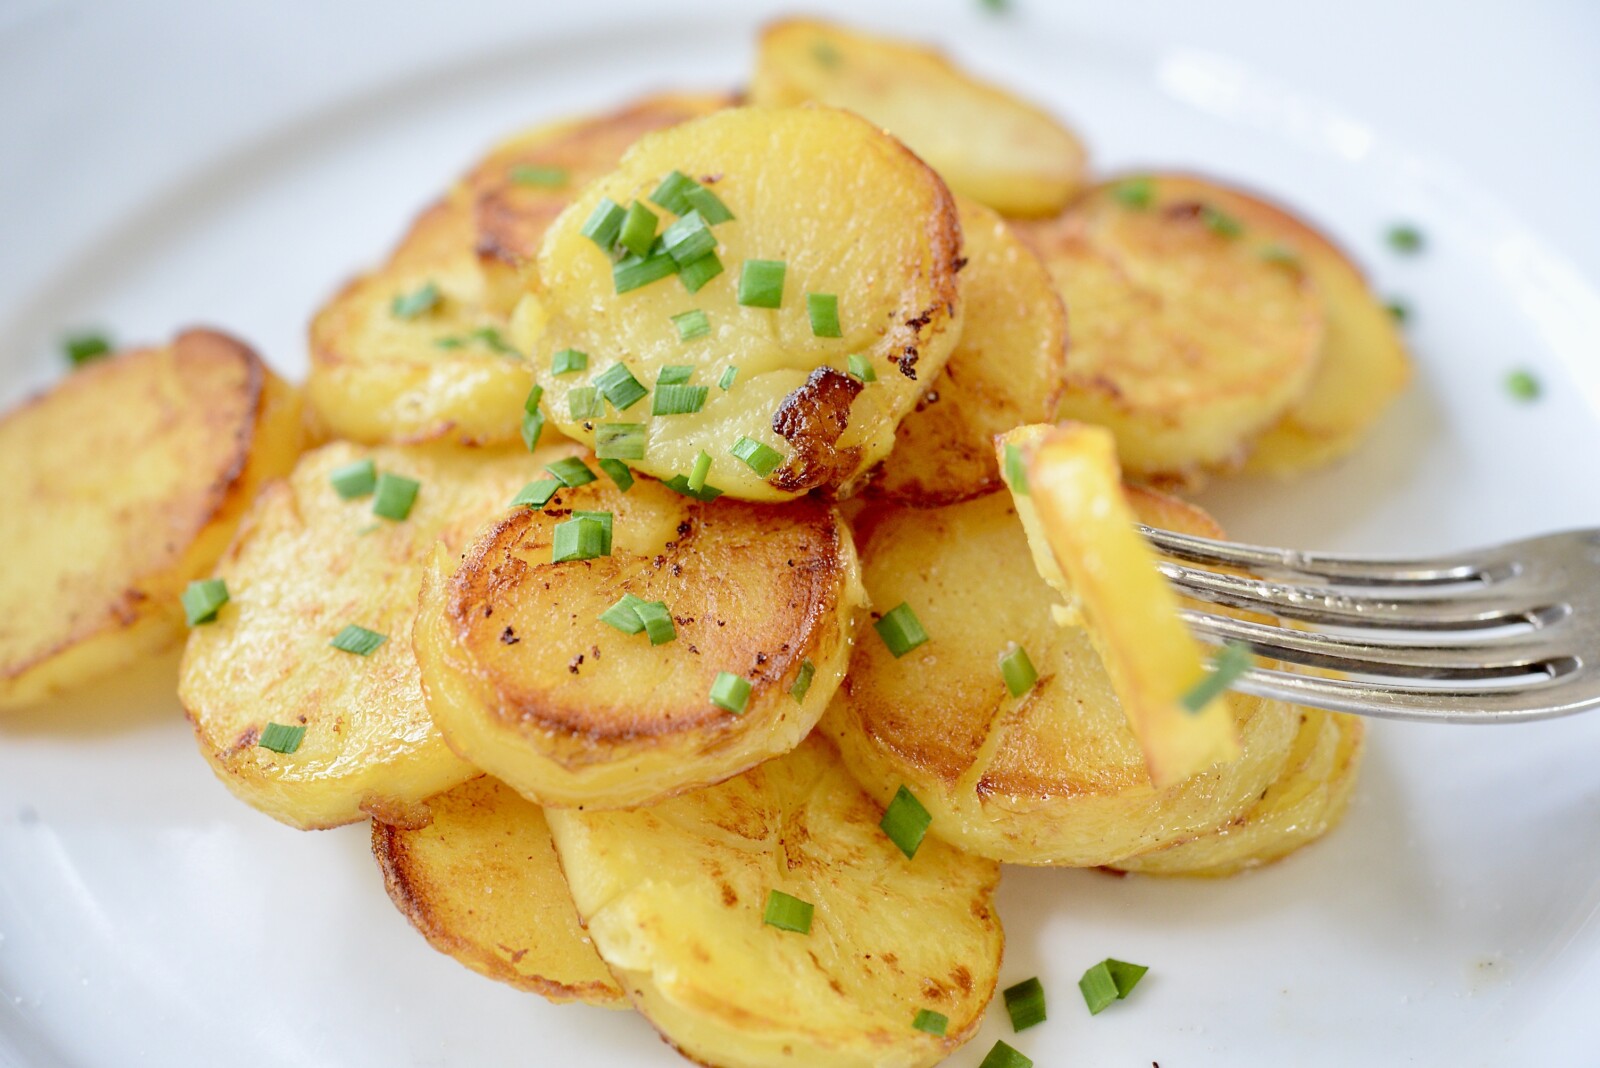 https://ourgabledhome.com/wp-content/uploads/2023/04/german-fried-potatoes-3.jpg